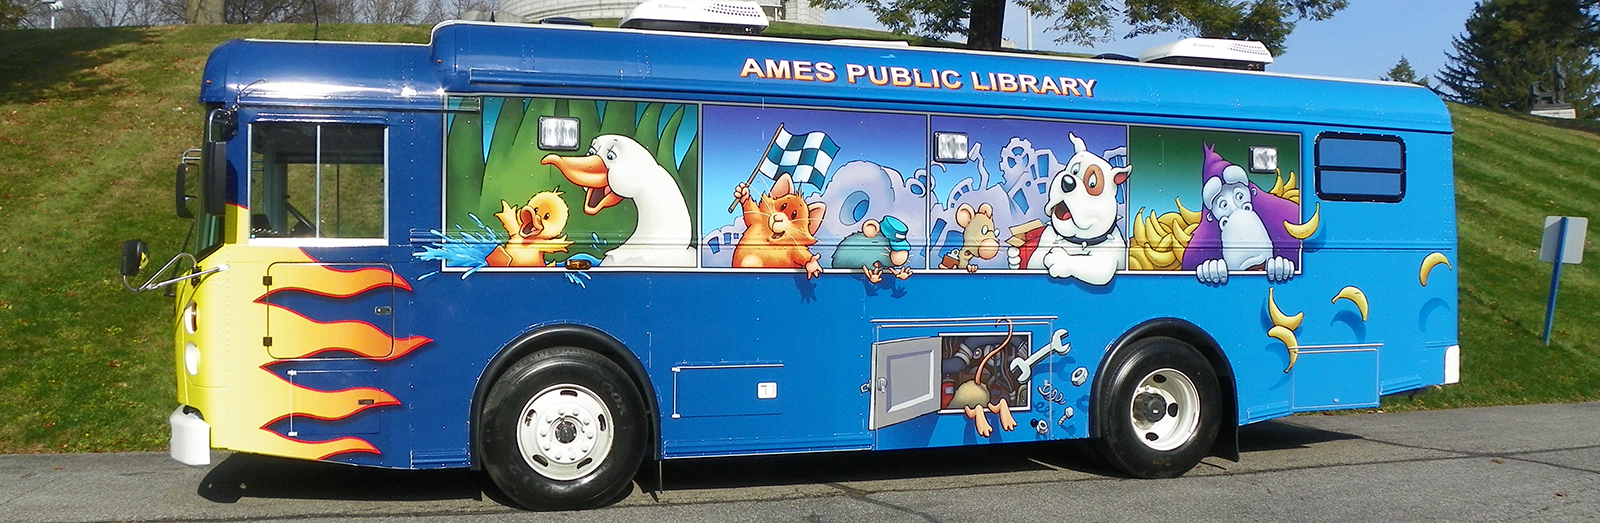 Bookmobile parked on sunny day